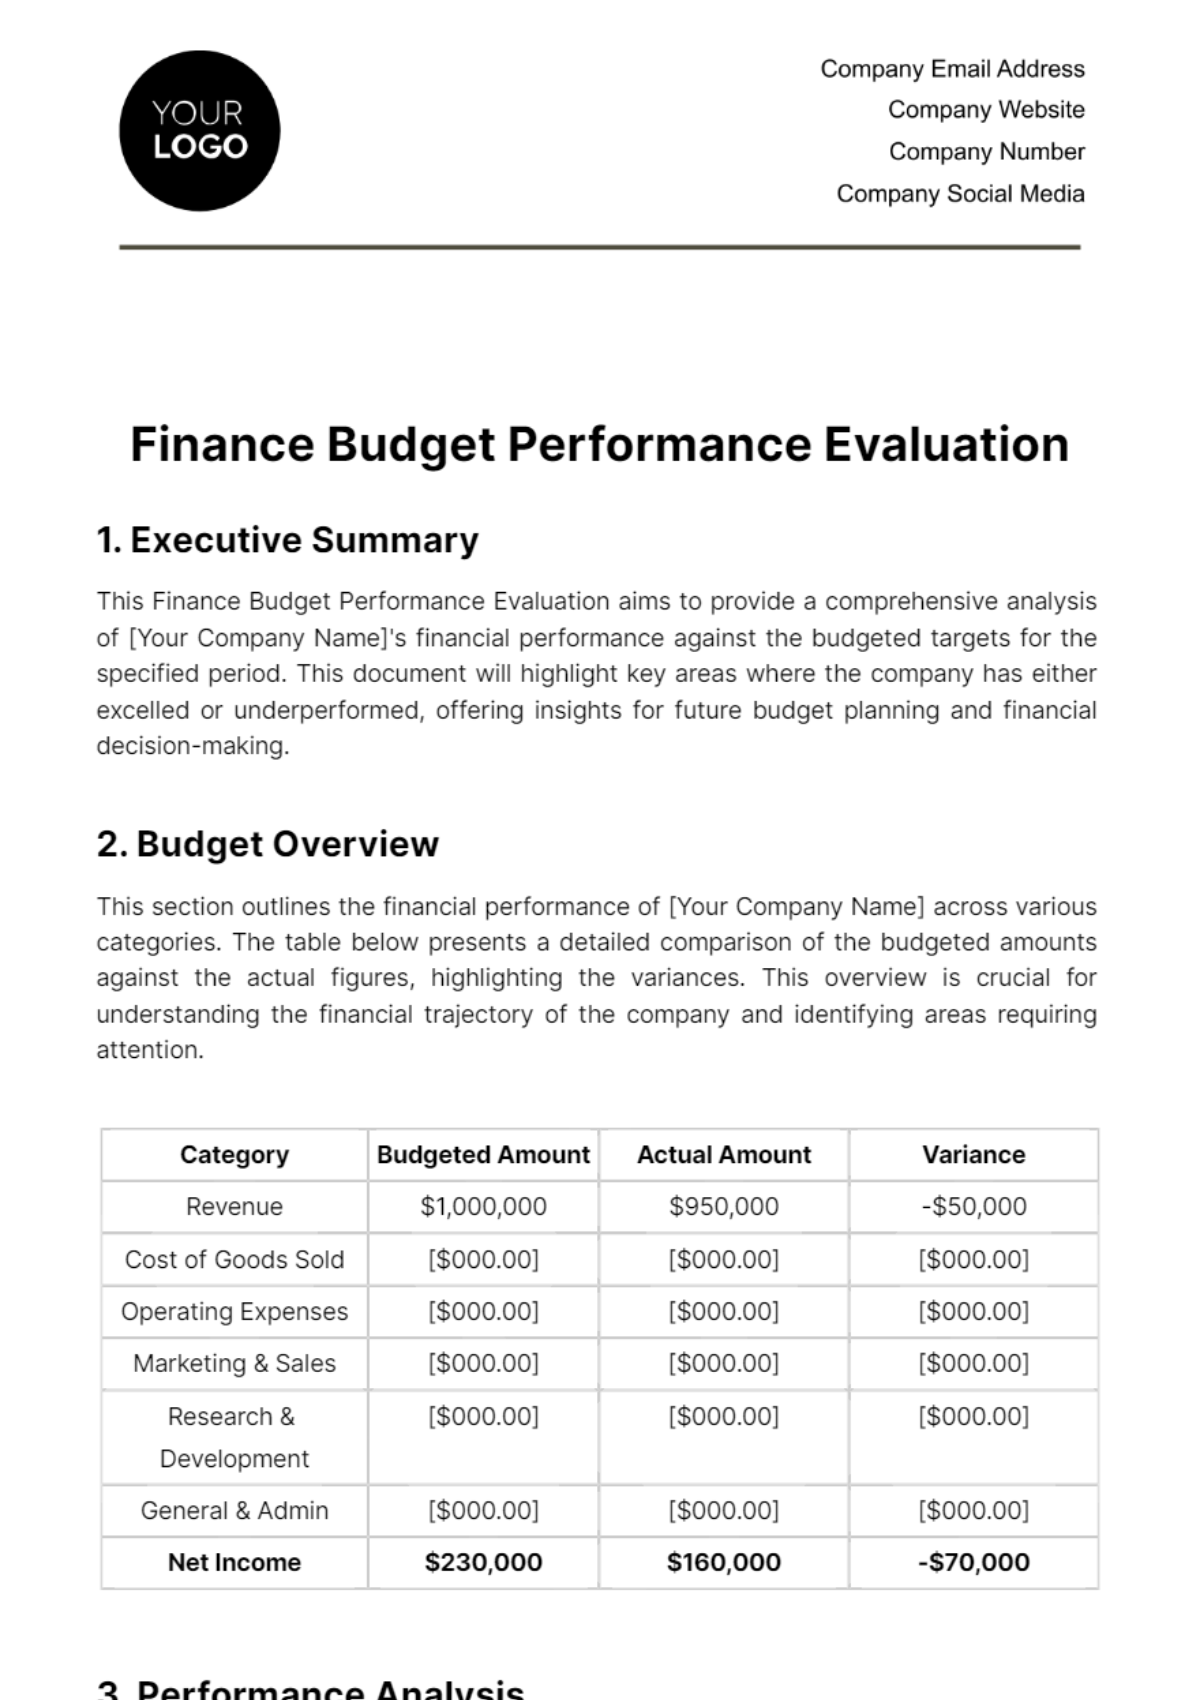 Free Finance Budget Performance Evaluation Template